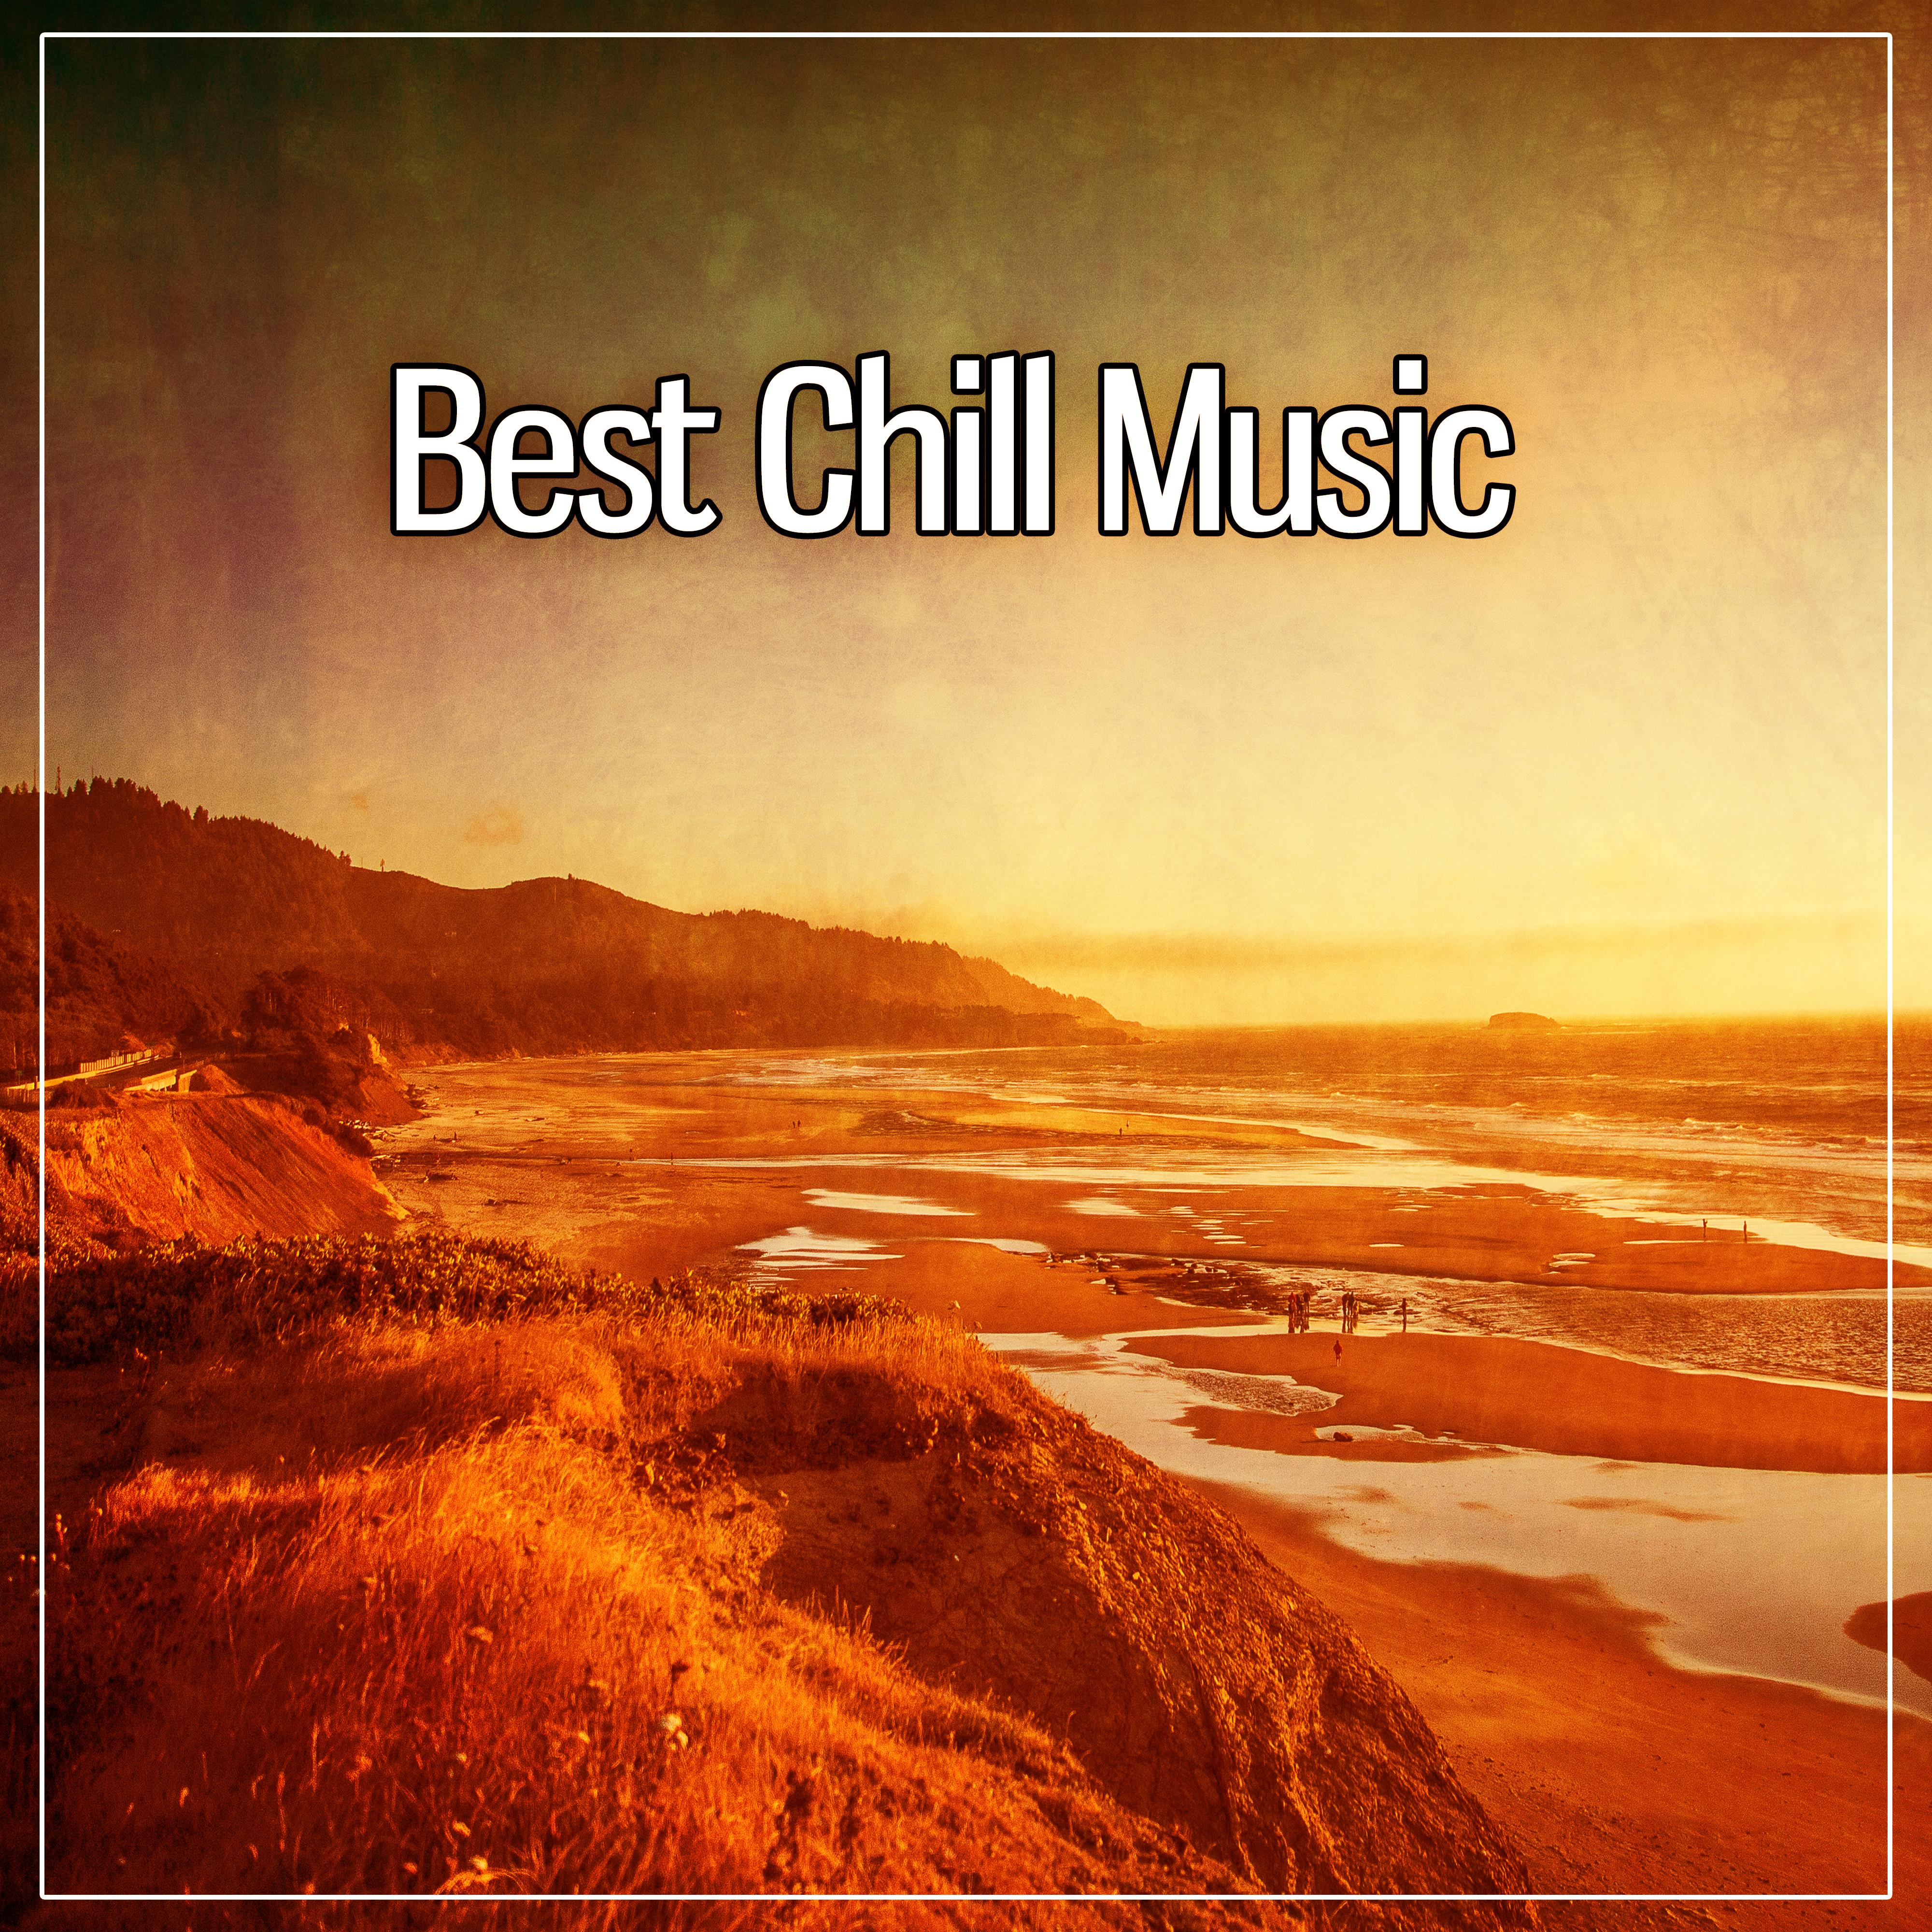 Best Chill Music  Chillout Music, Party Lounge, Chill Del Mar, Music to Relax, Soft Sounds